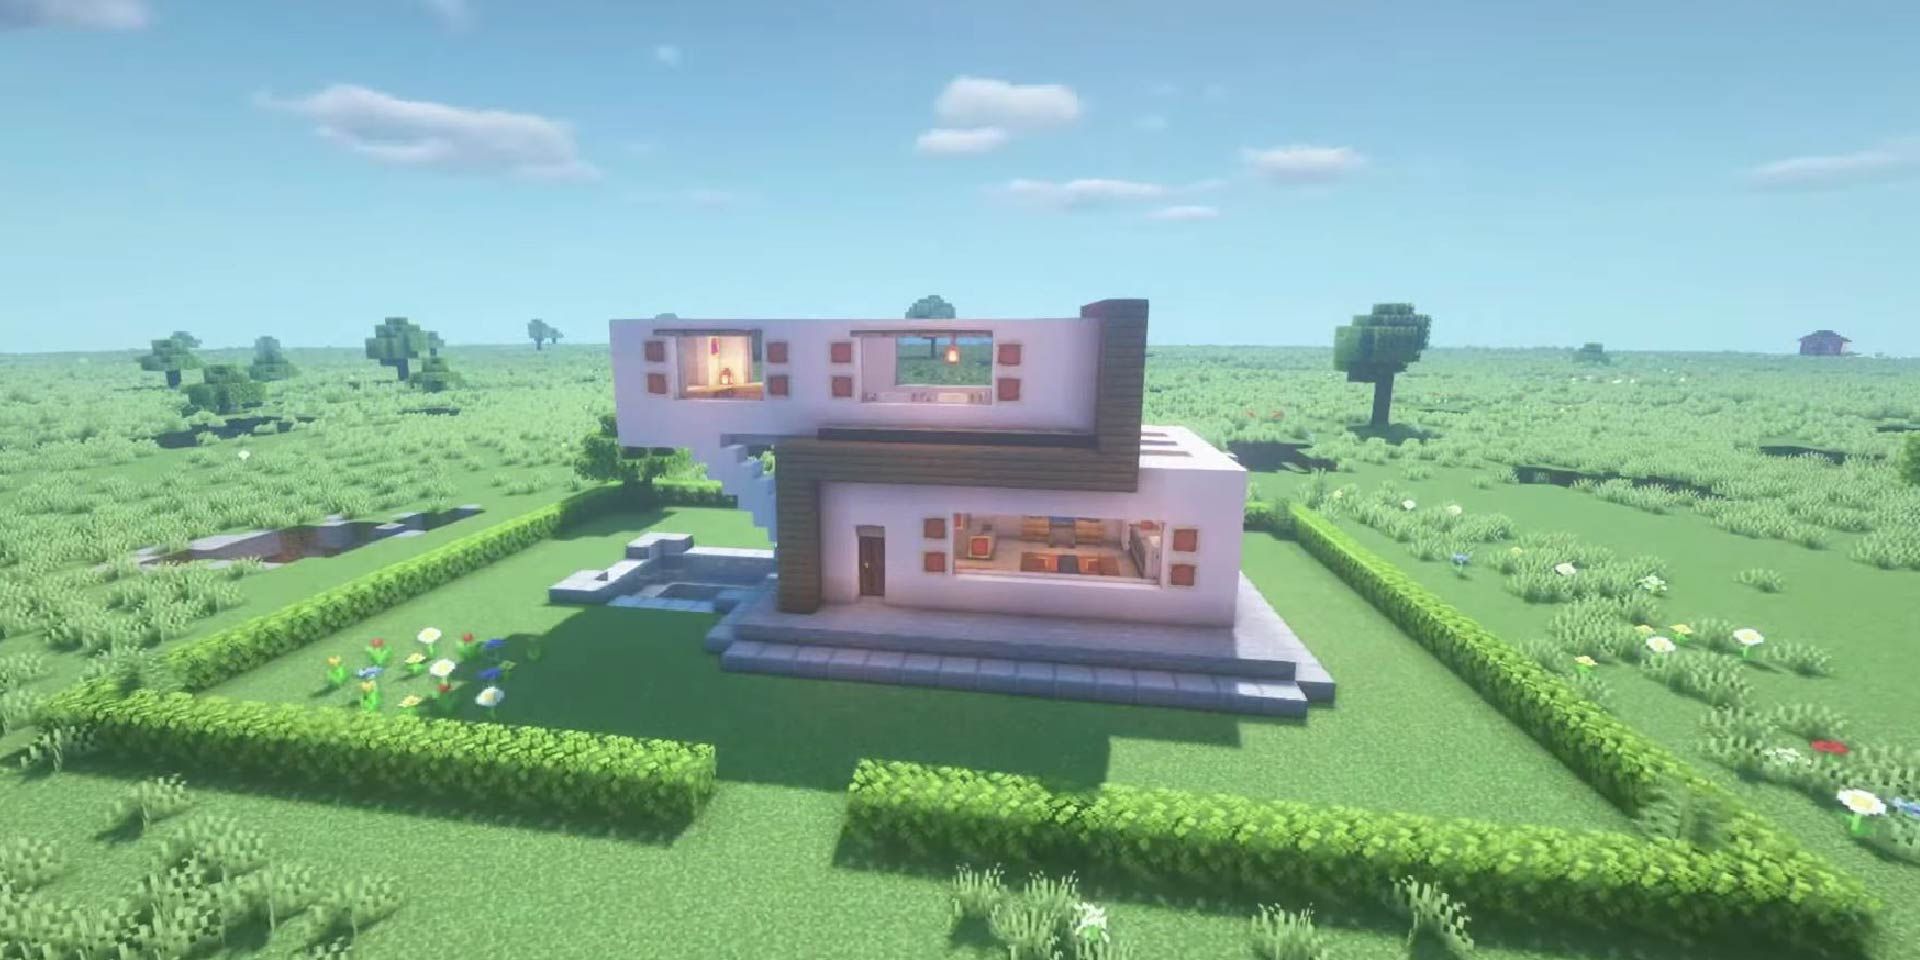 A modern-style smart house in Minecraft.